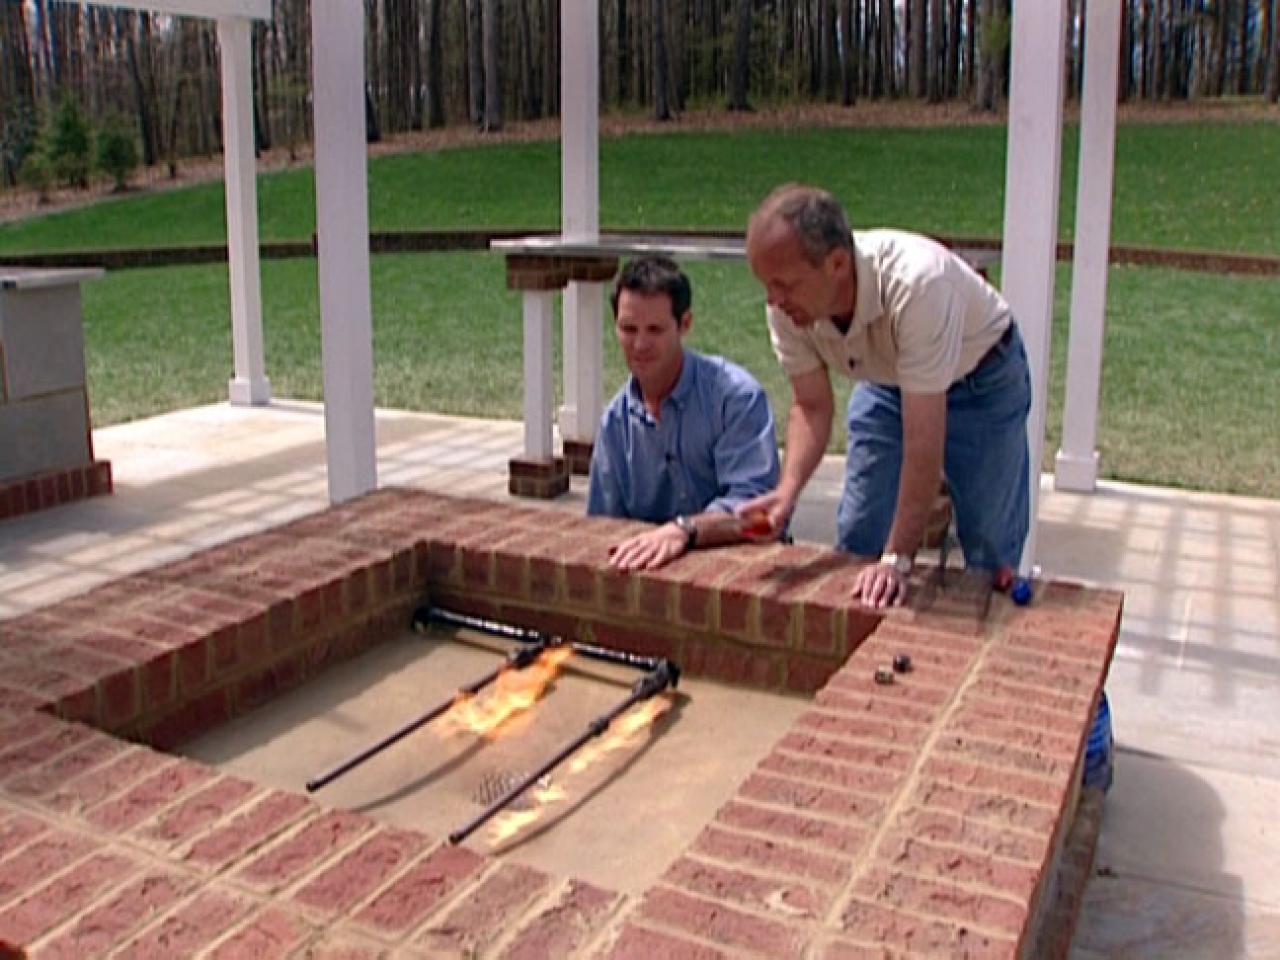 How To Hook Up The Gas For A Fire Pit, How To Build A Natural Gas Fire Pit